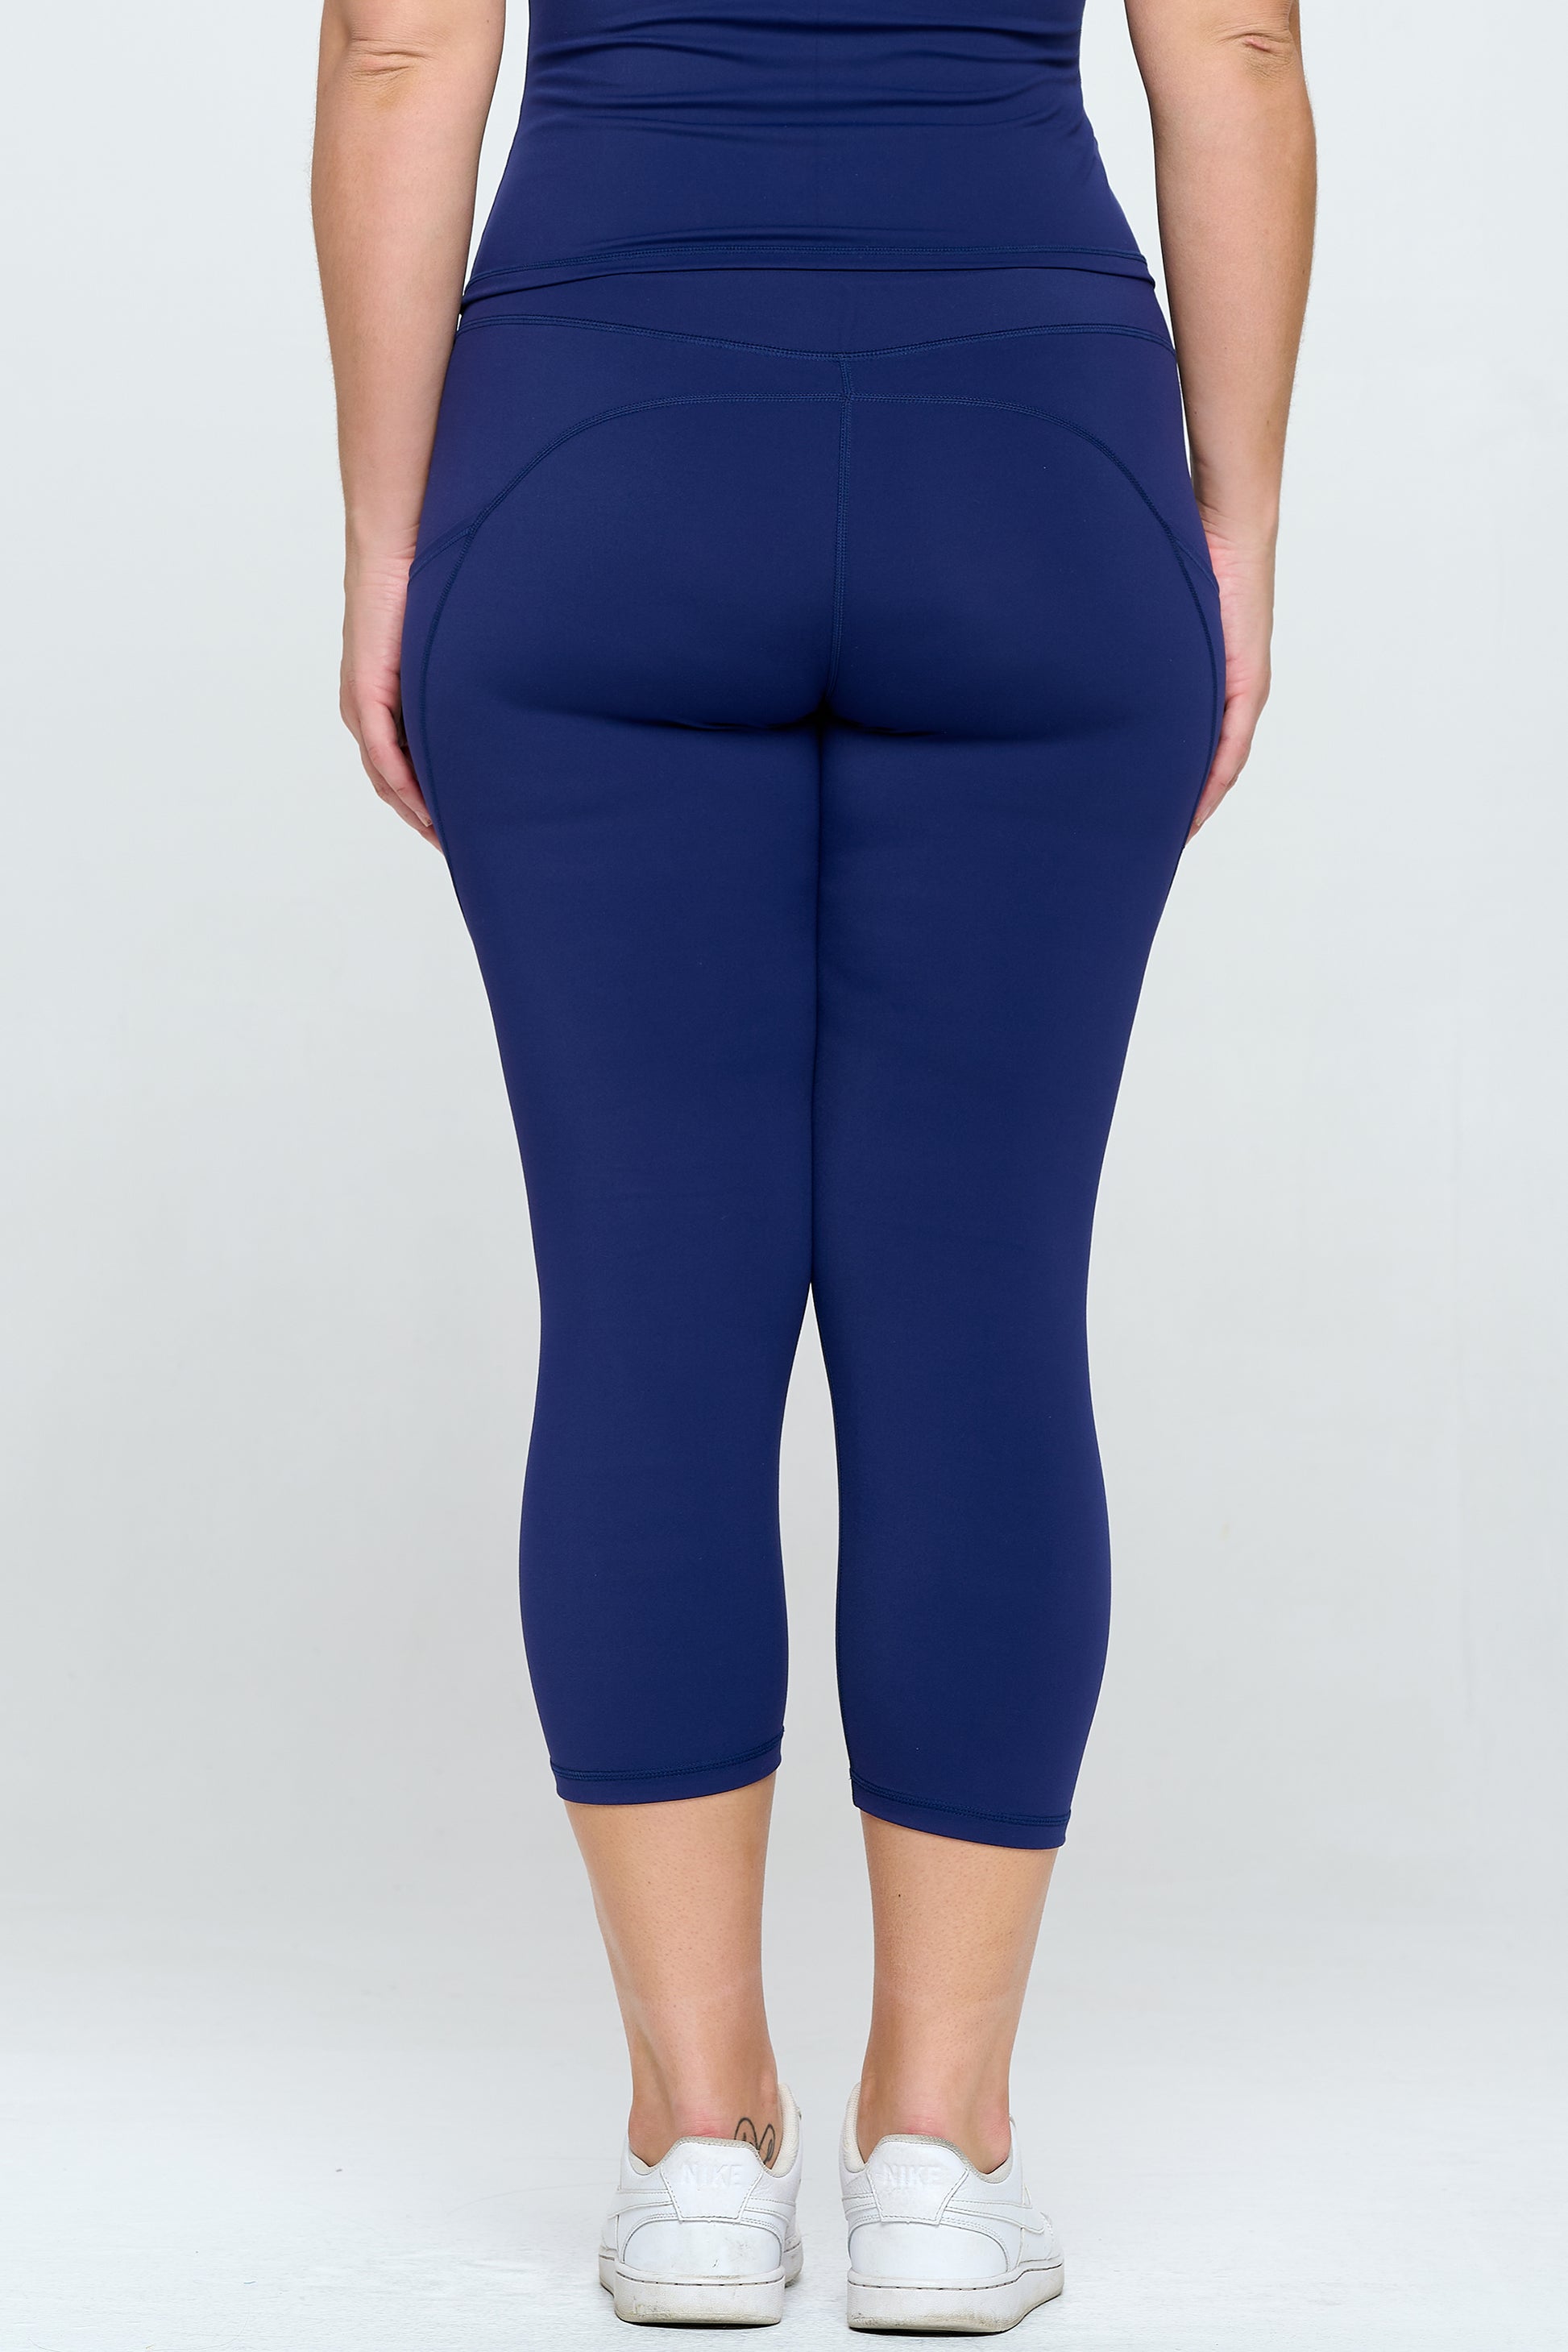 Buttery Soft High Waisted Capri Leggings with Pockets - Navy Blue